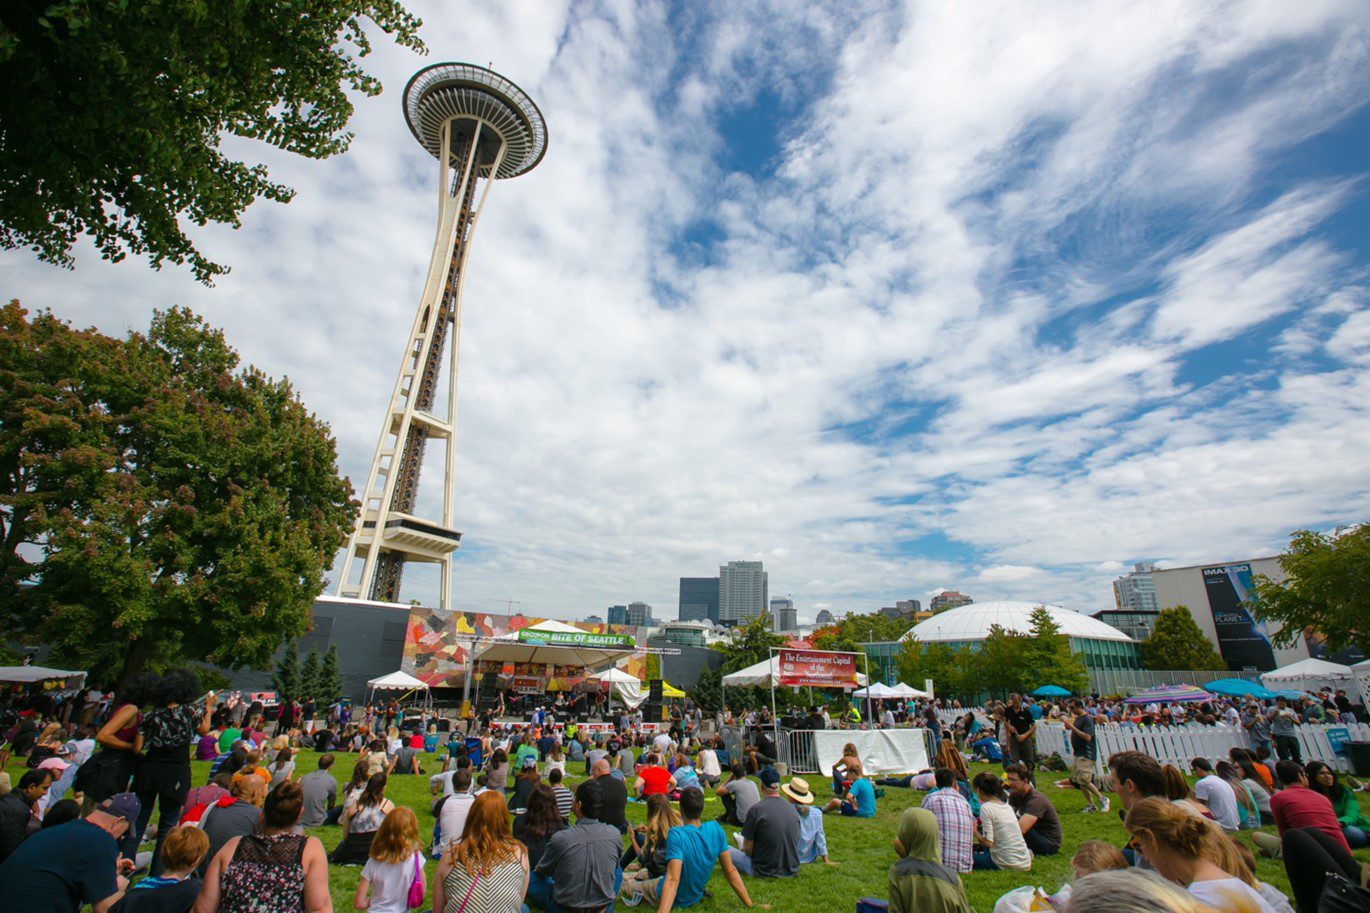 A crowd sitting and standing in a grassy area. Food vendors, buildings, trees, clouds, day time.